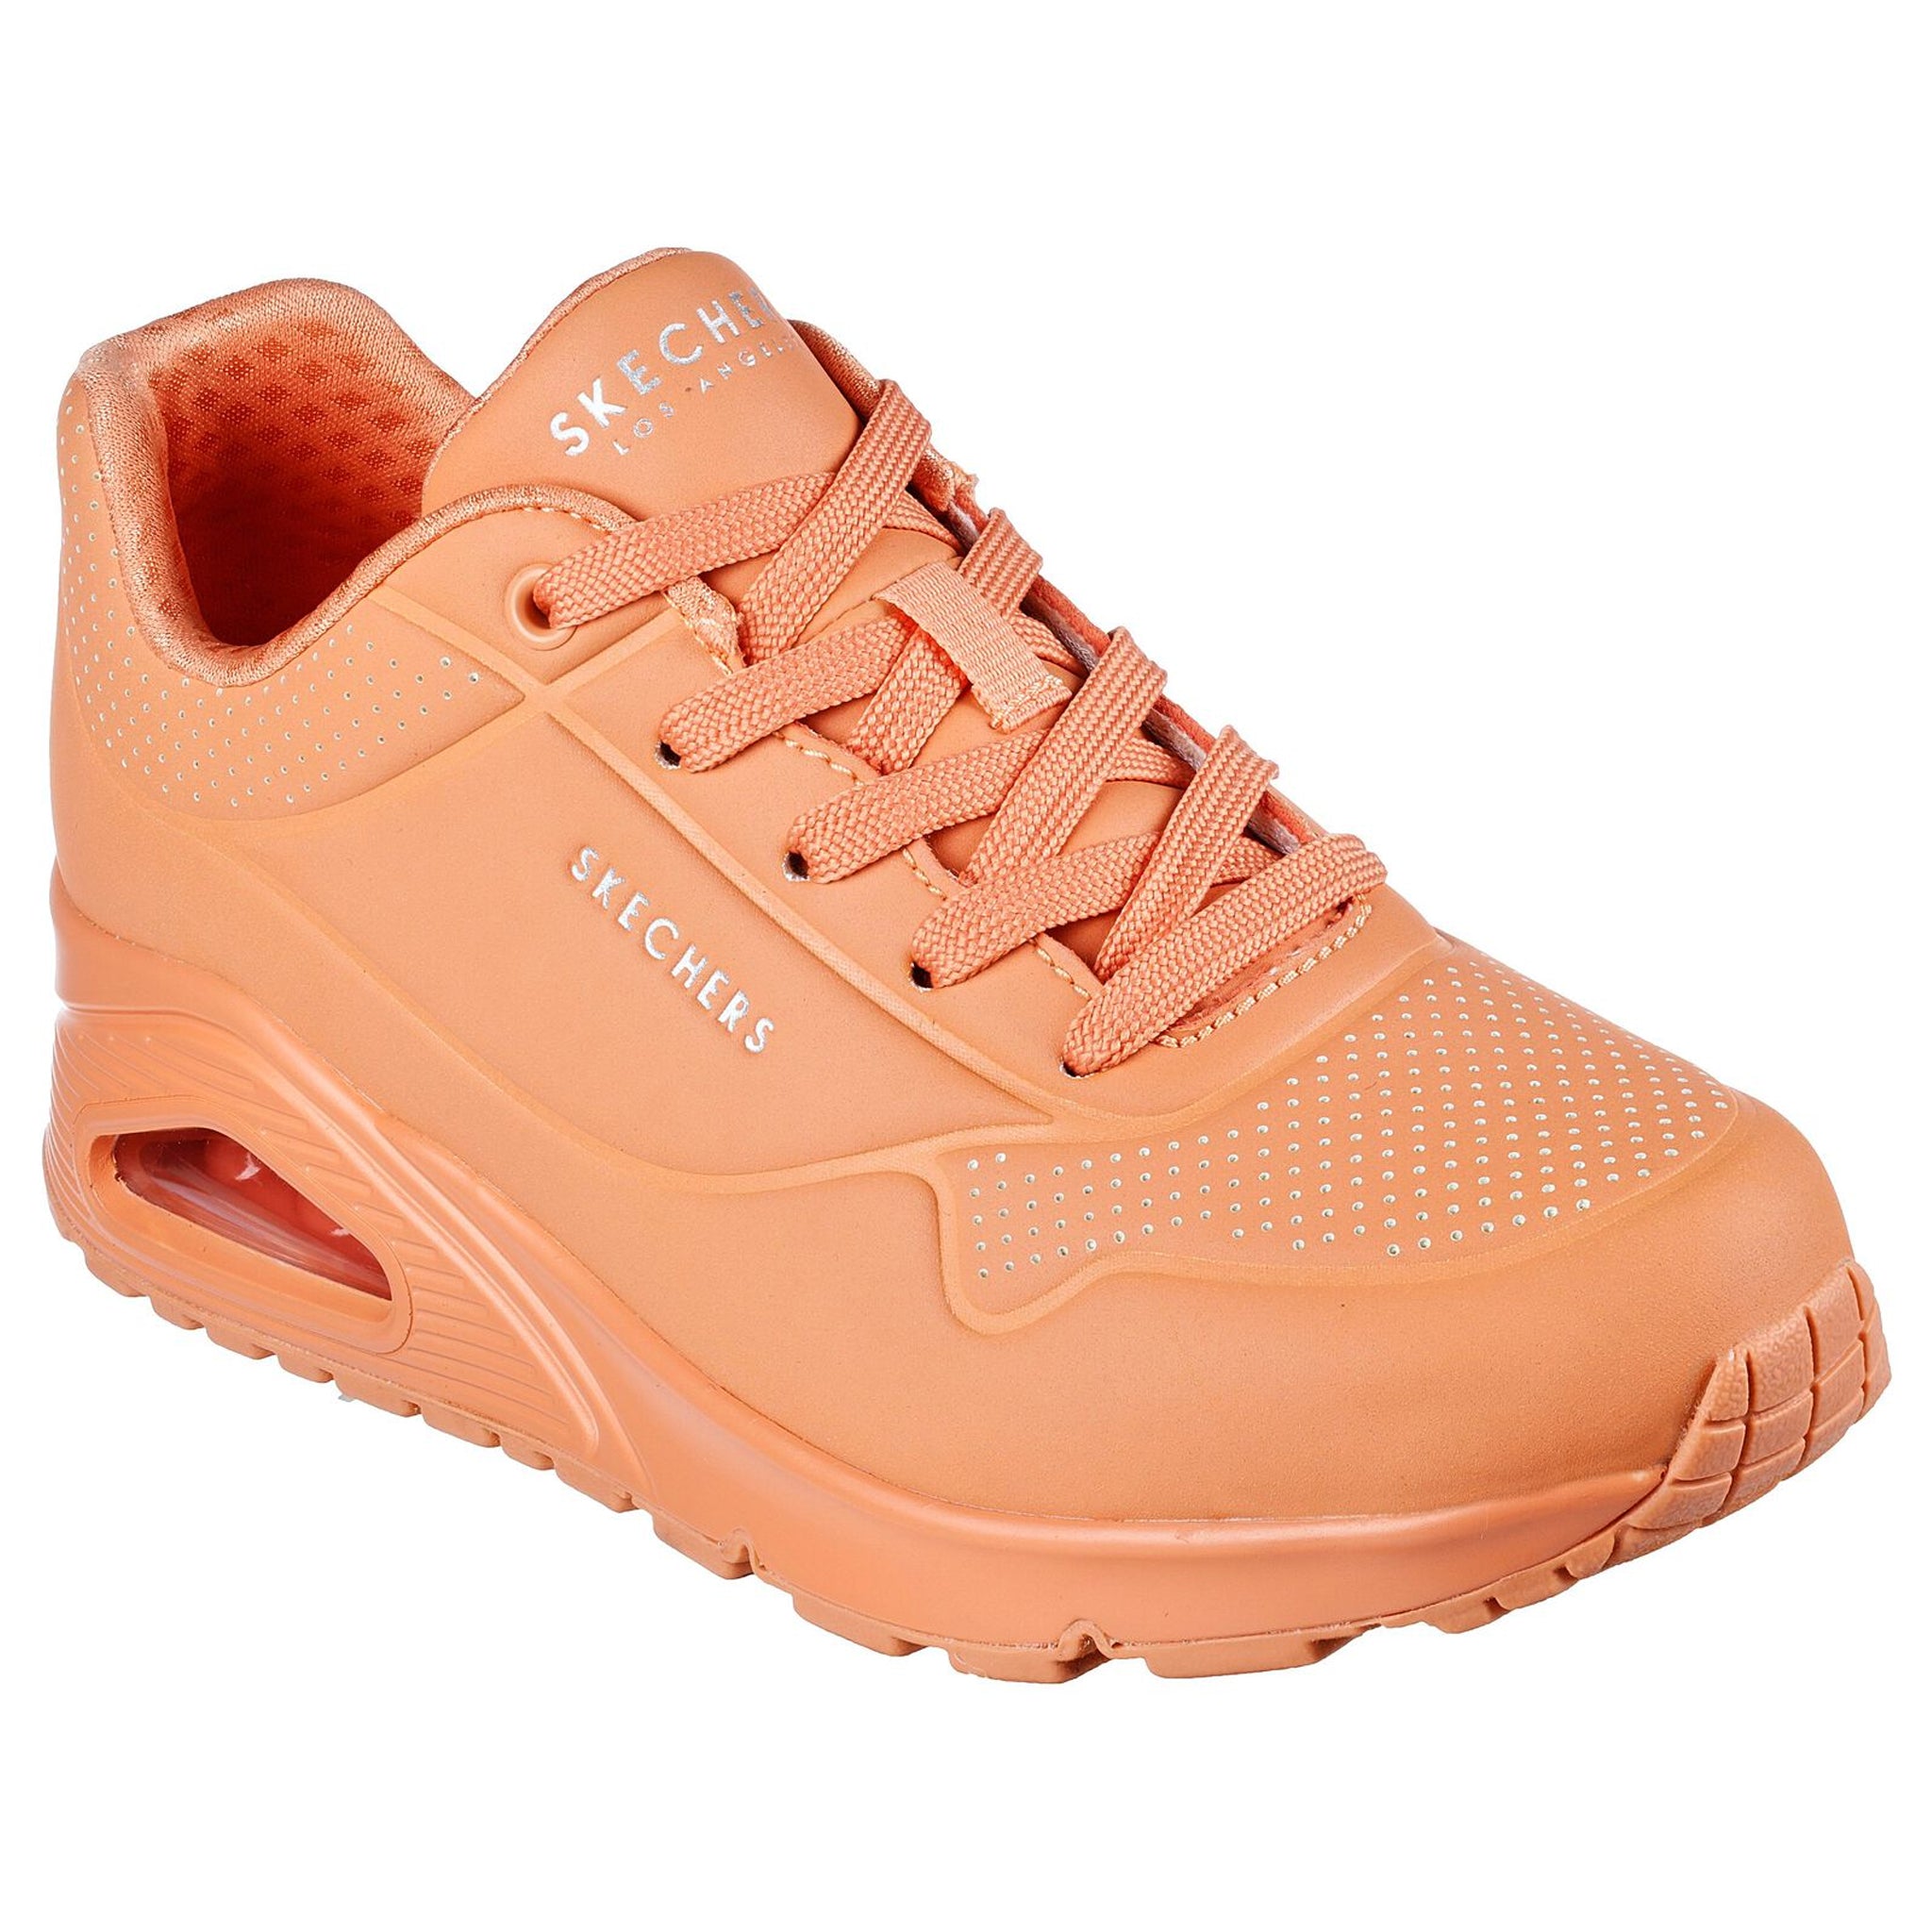 Skechers Women's Uno - Bright Air Coral Casual Shoes – Shoe Store and More